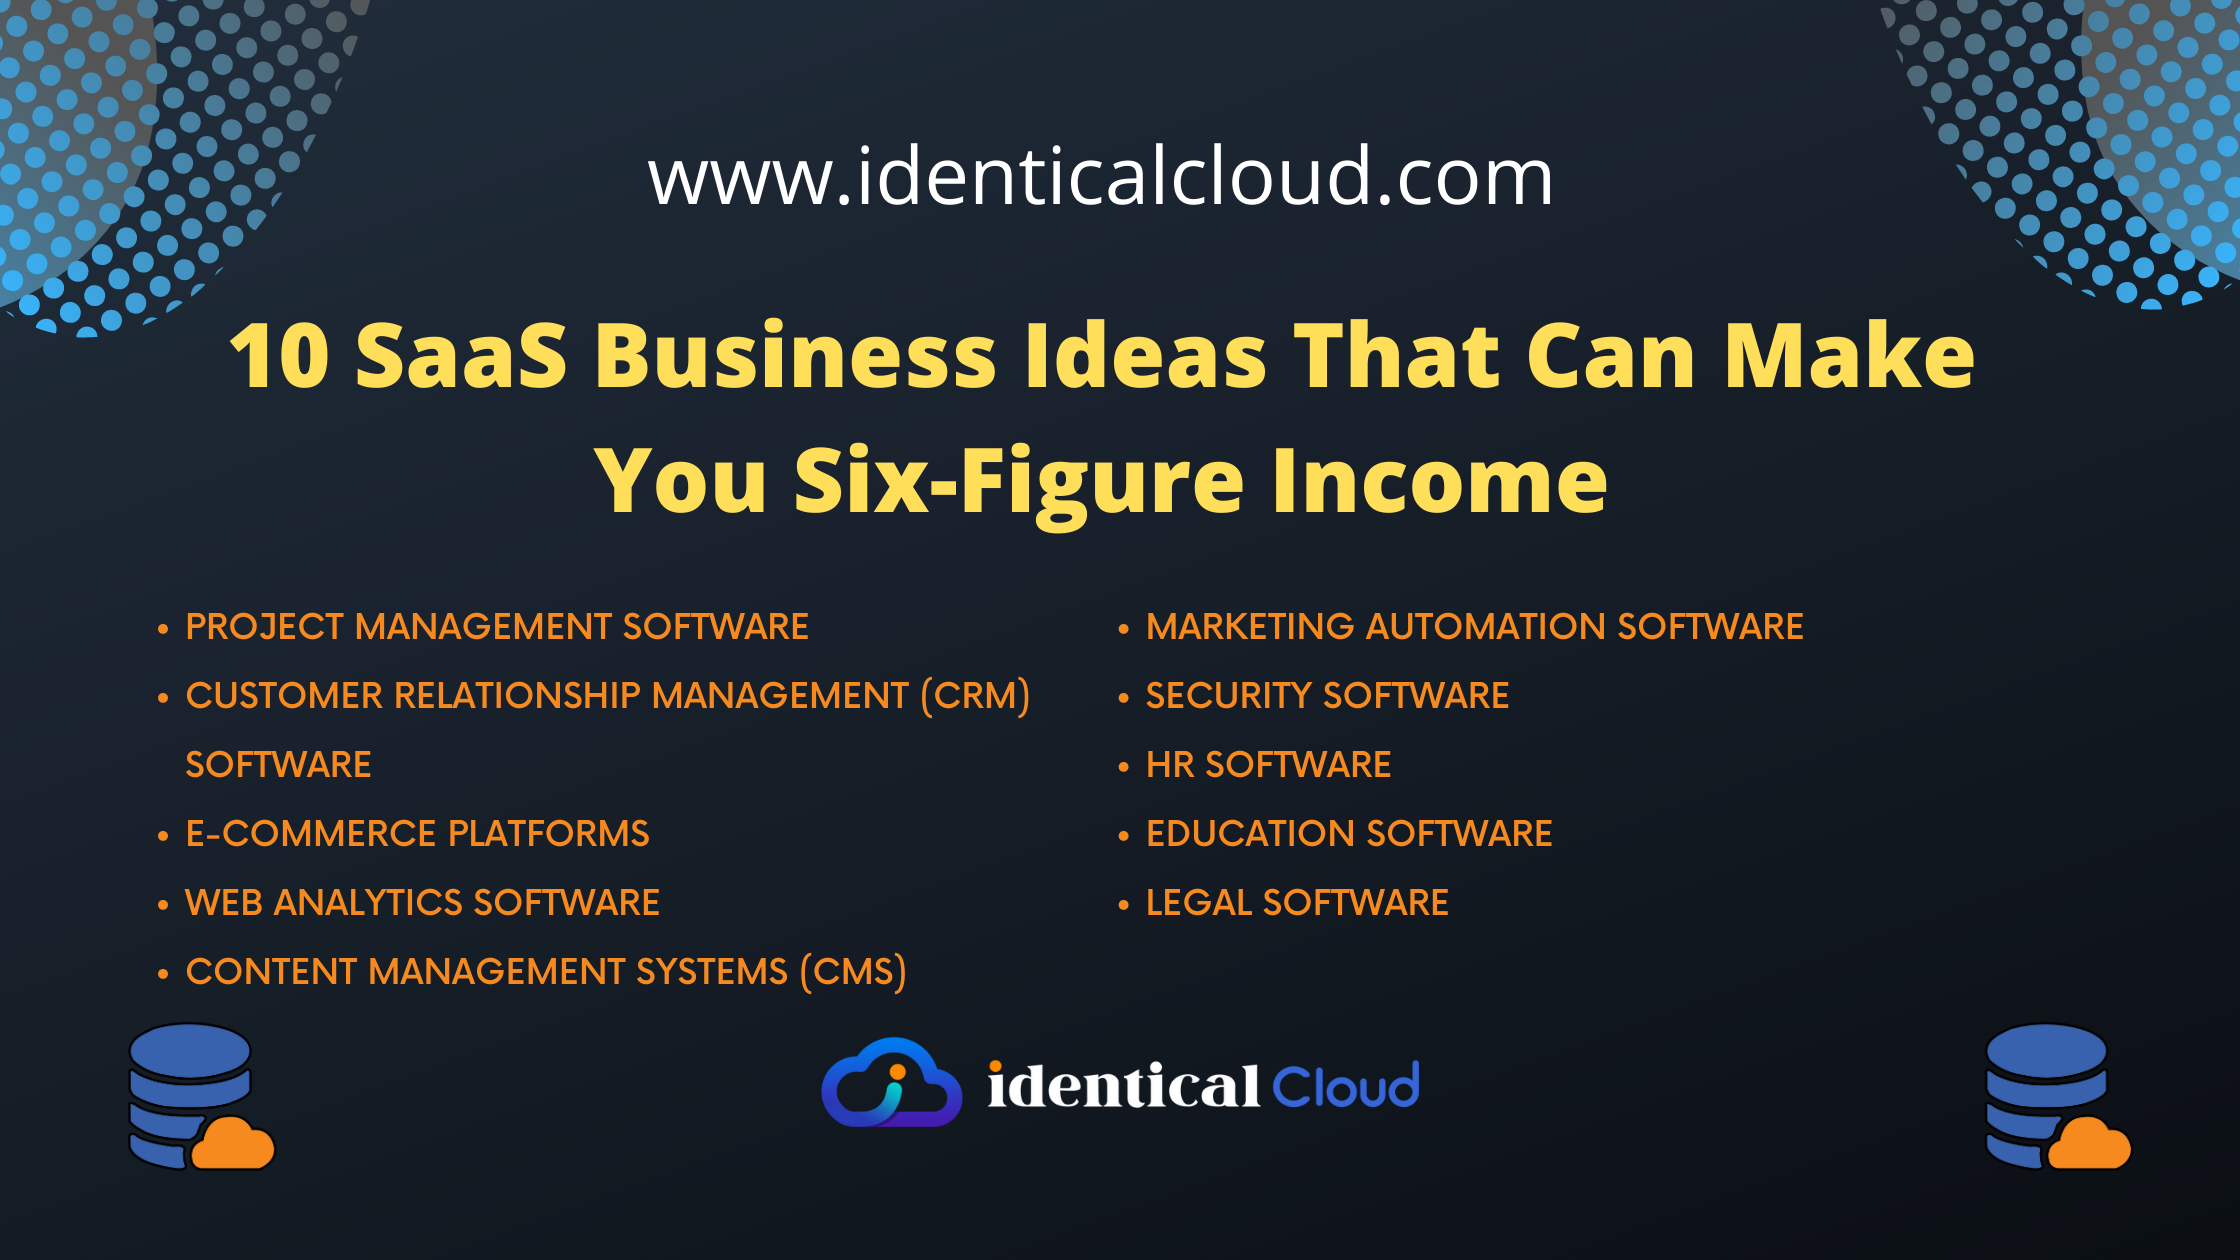 10 SaaS Business Ideas That Can Make You Six-Figure Income - identicalcloud.com